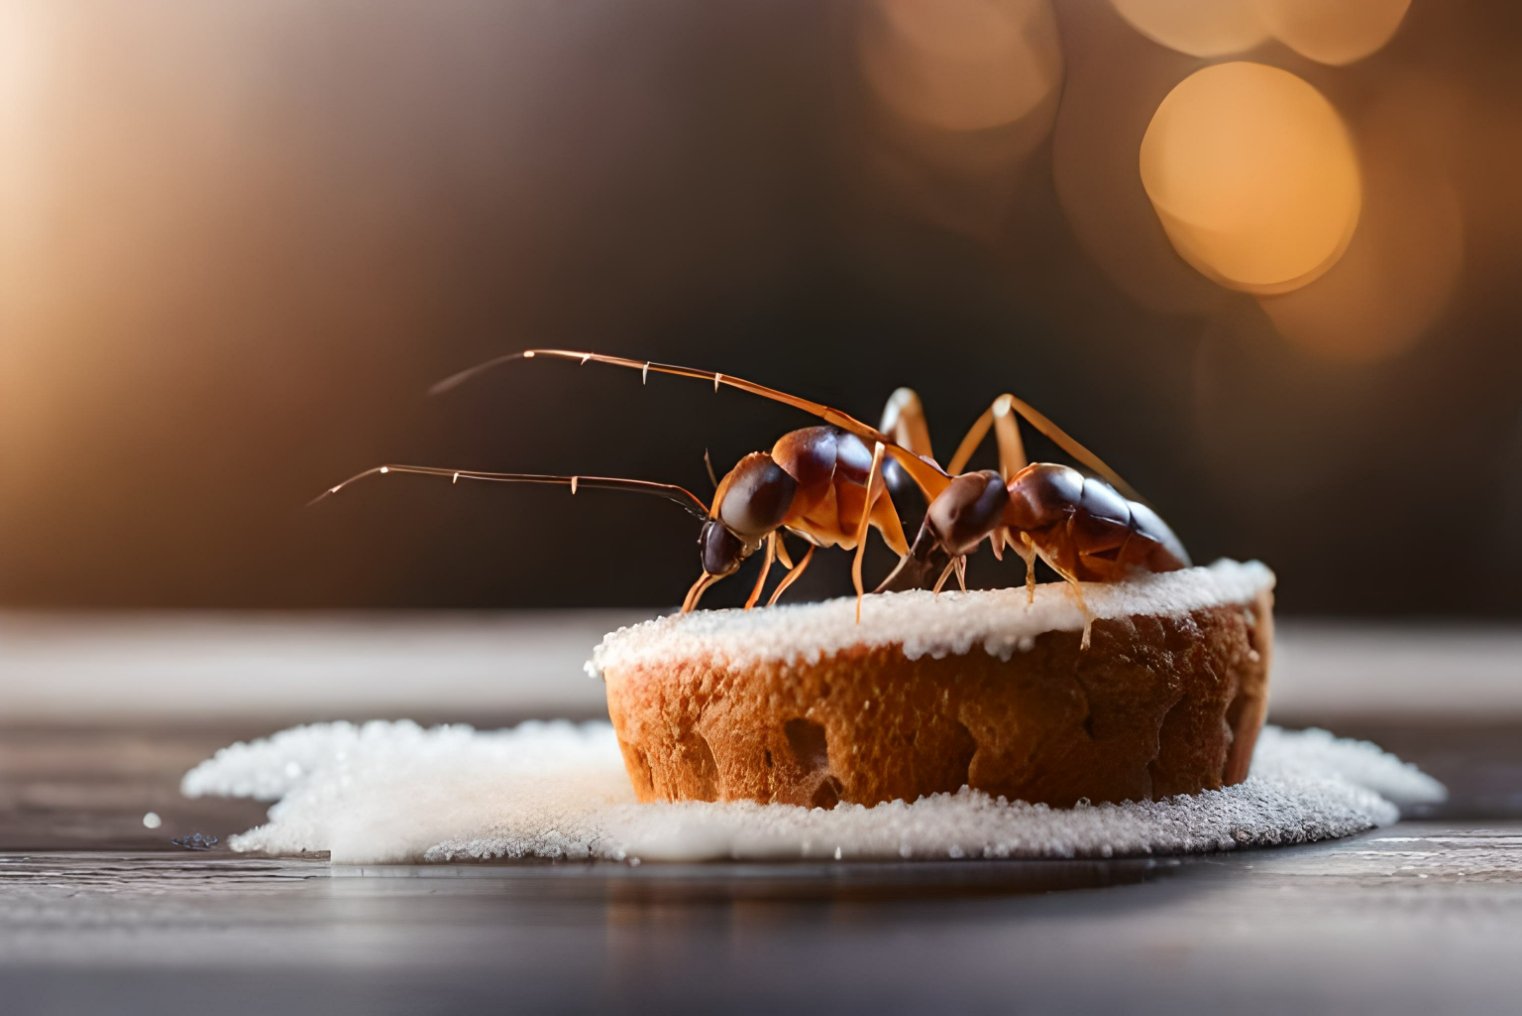 An ant sitting on a pastry